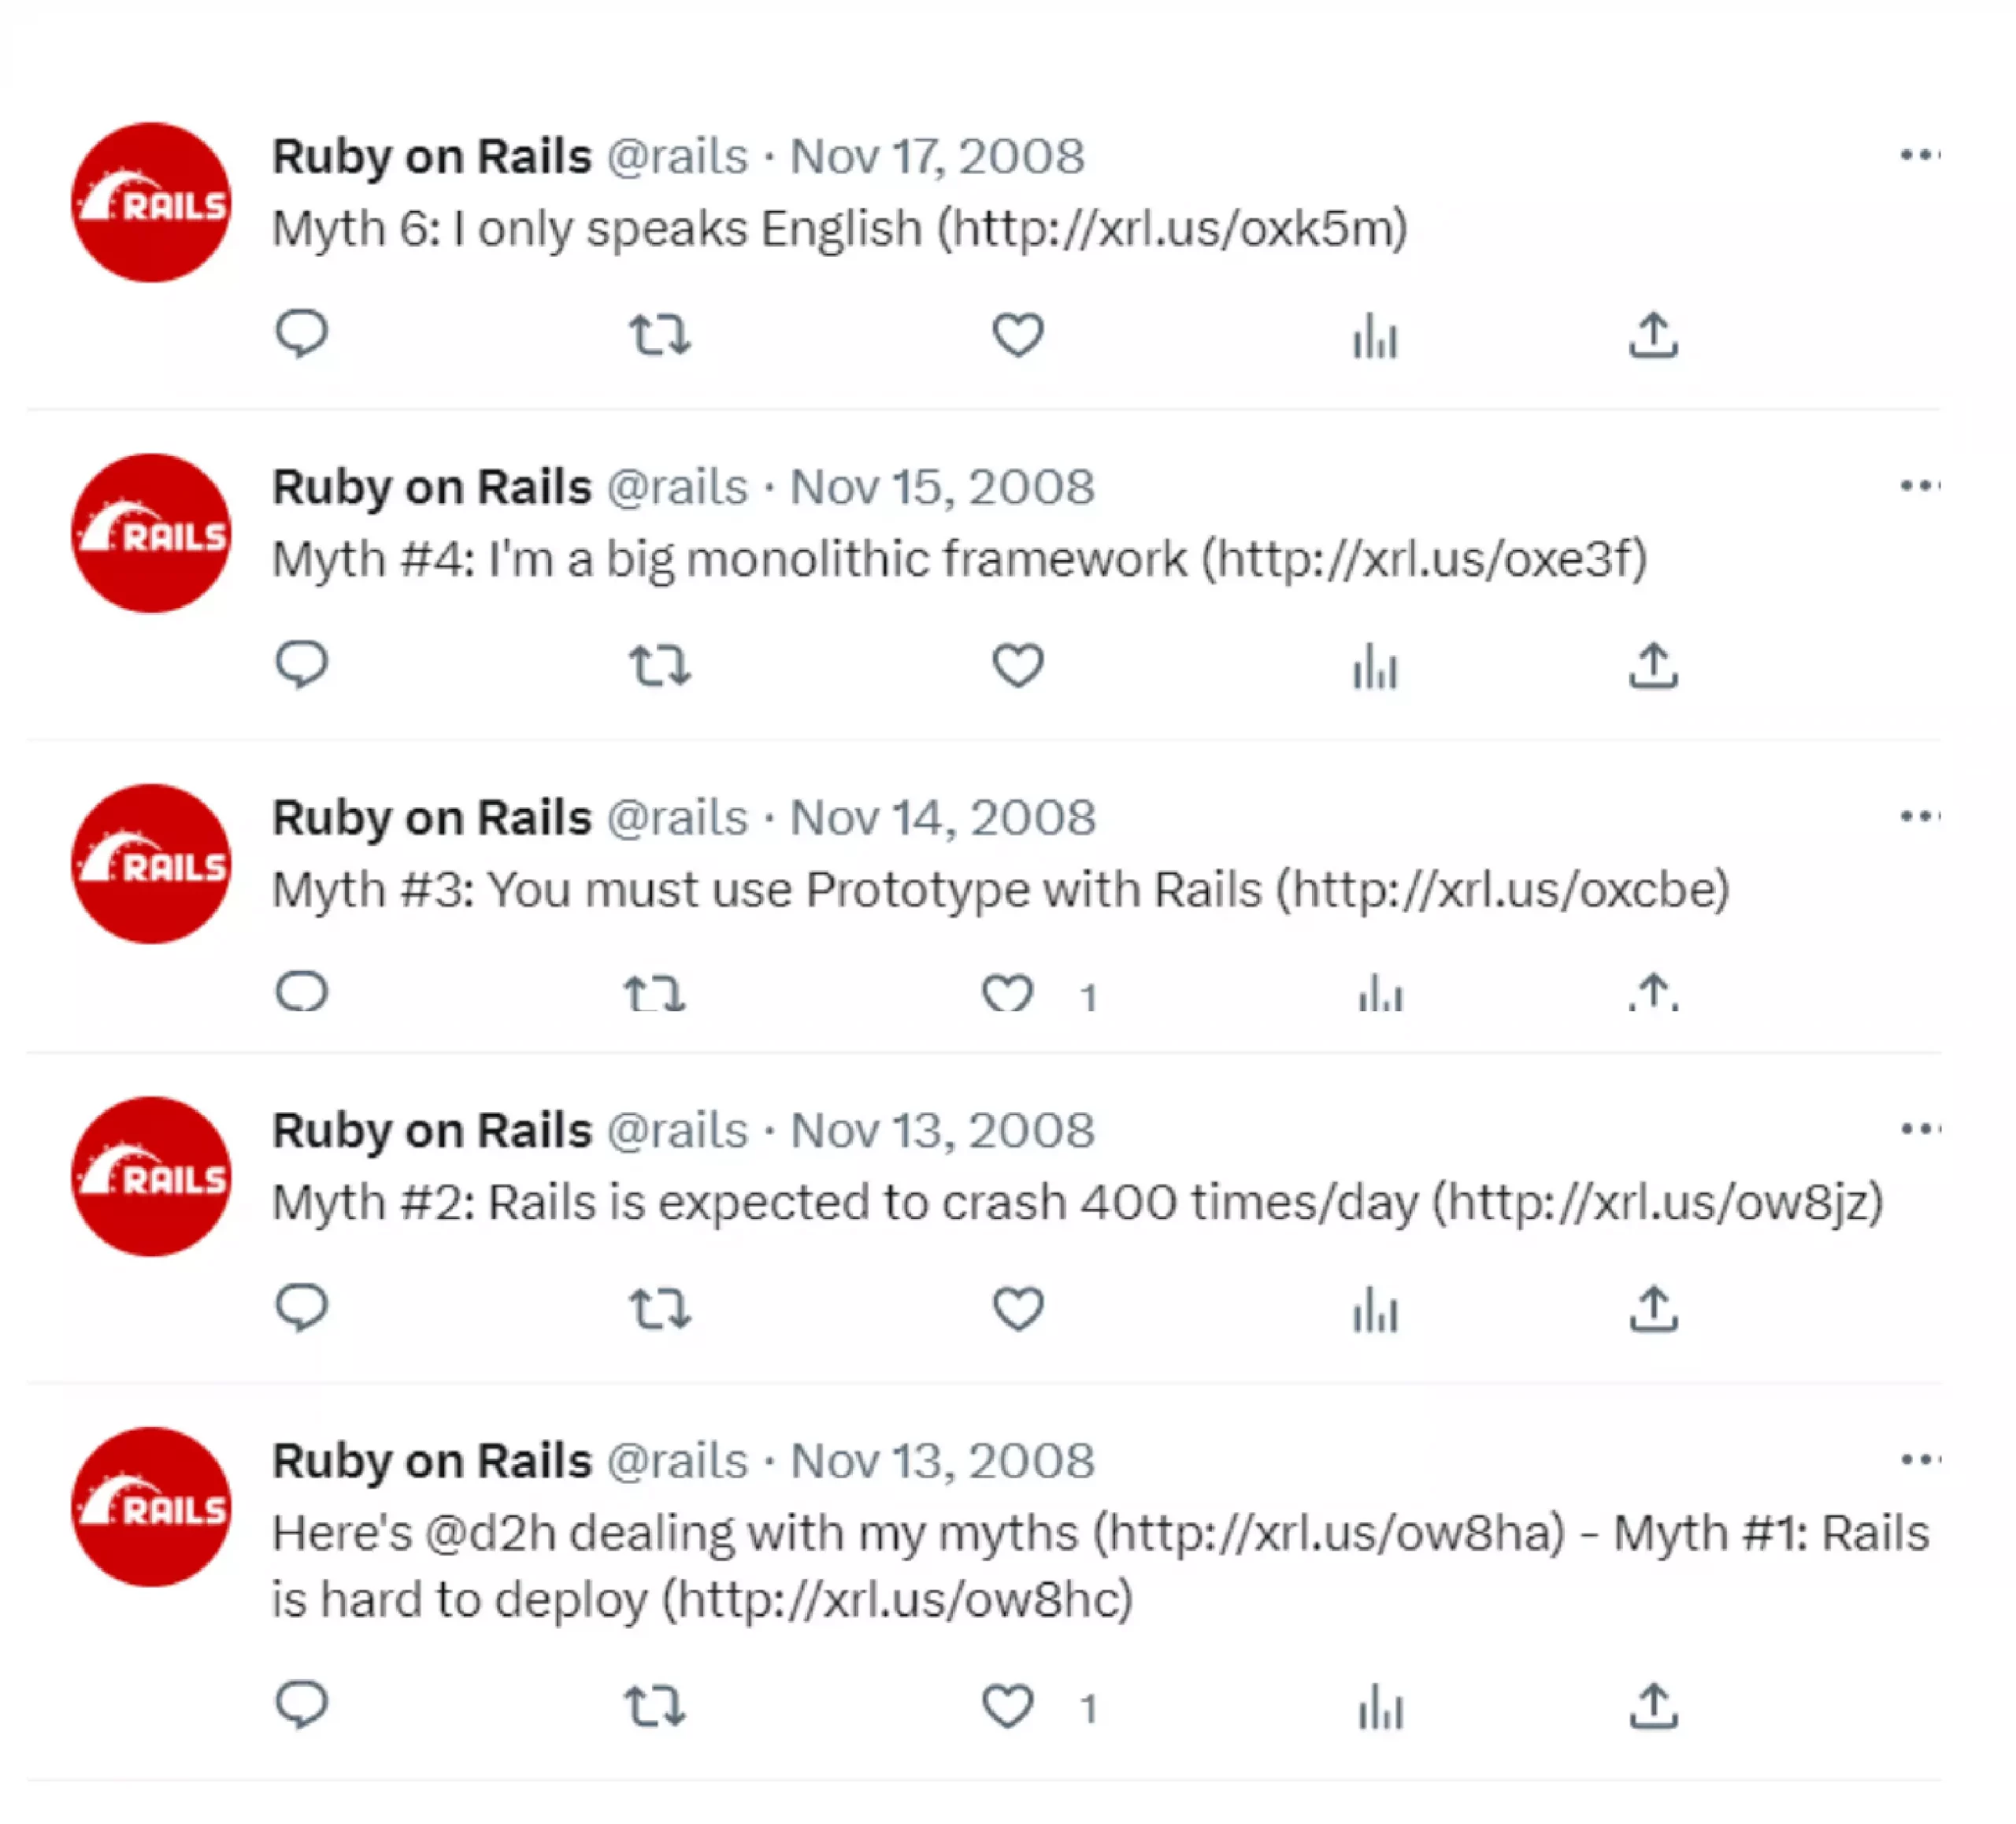 Tweets about myths of Ruby on Rails